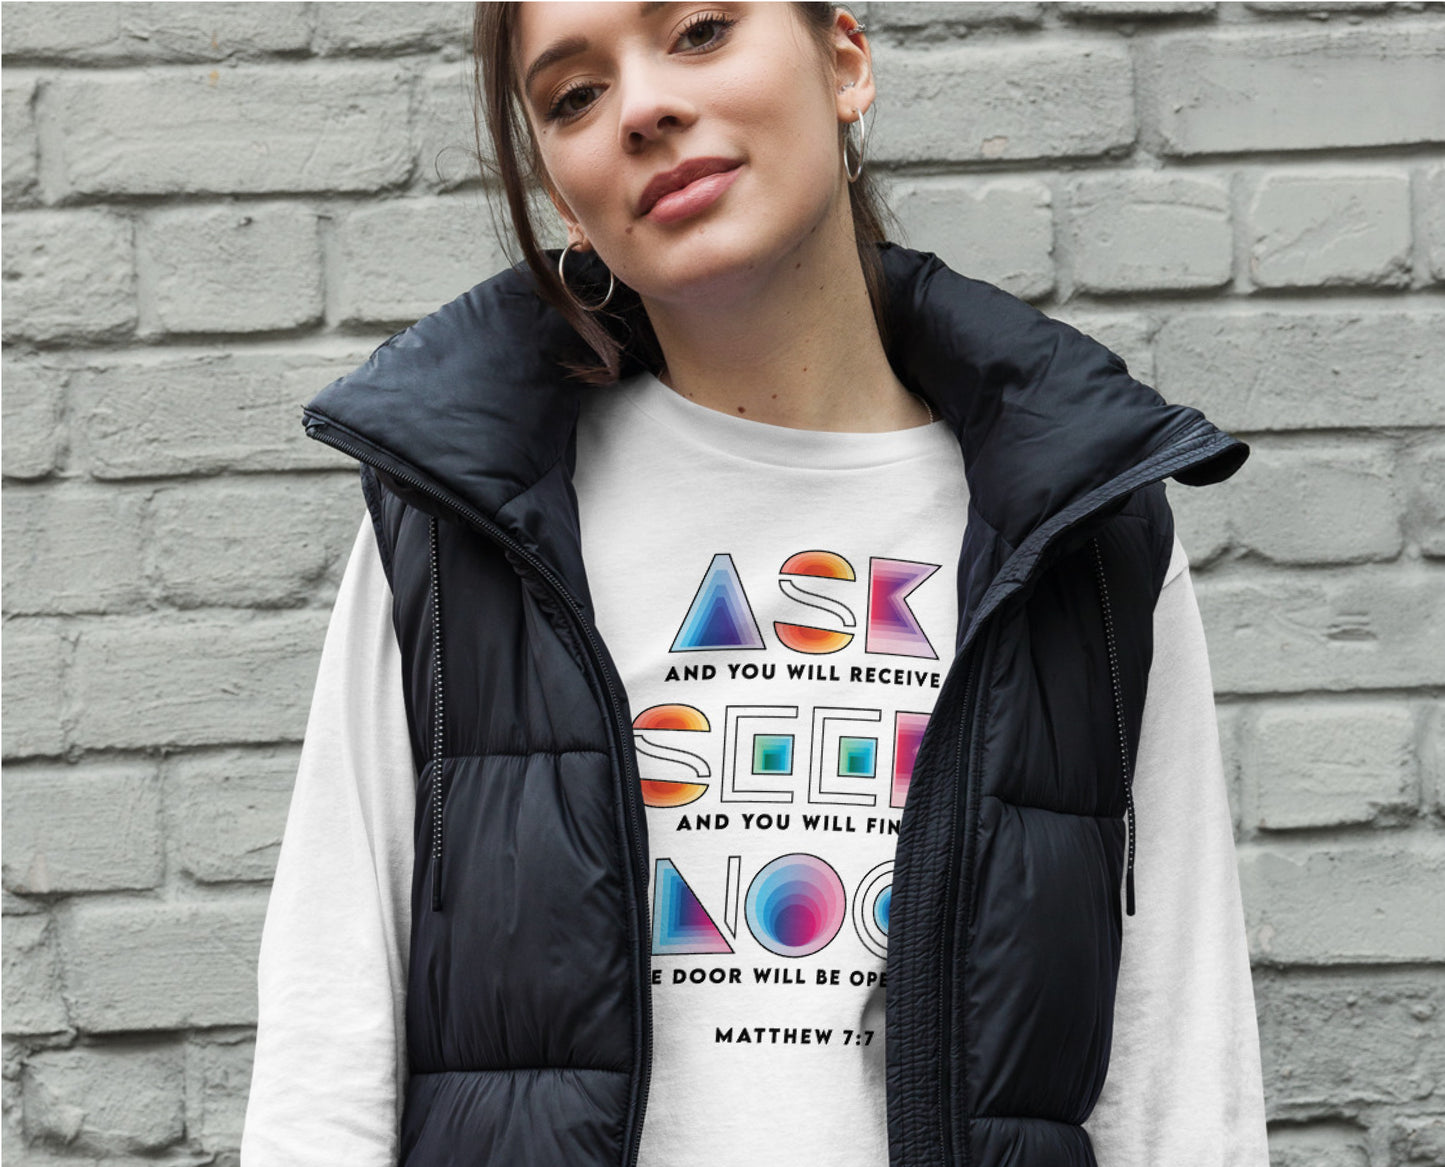 Ask Seek Knock Matthew 7:7 Christian aesthetic design printed in holographic colors on white soft long sleeve tee for men & women